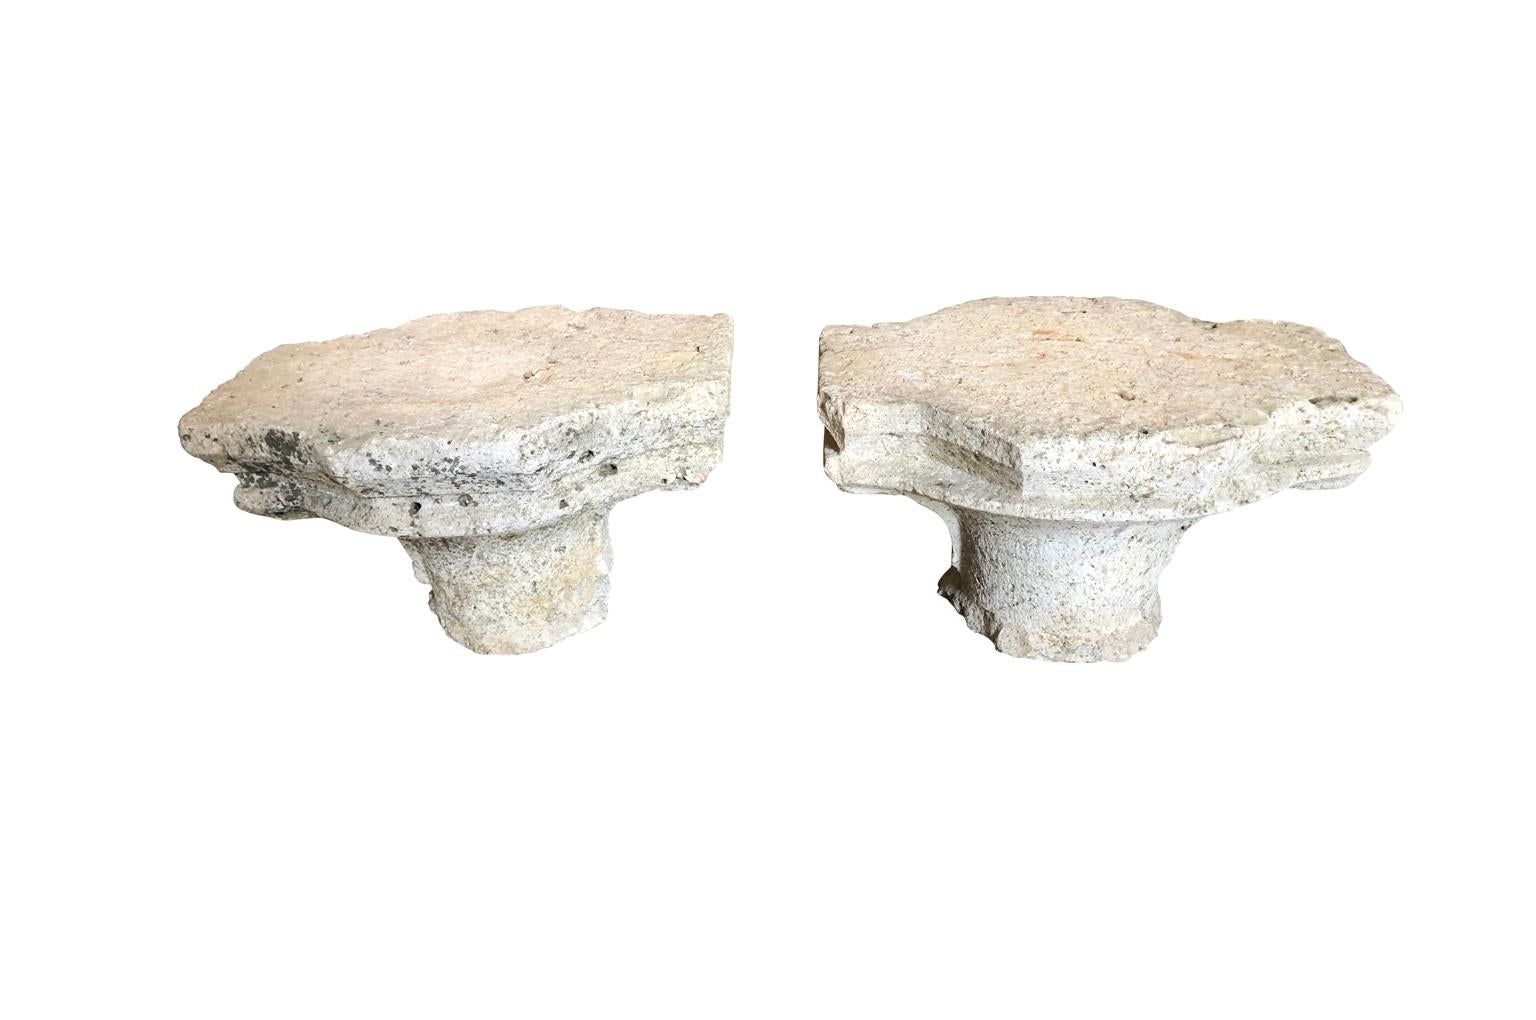 A fantastic pair of Gothic period hand carved stone capitals from the Avignon area of France. Exceptional fragments whether used architecturally or converted into end tables.